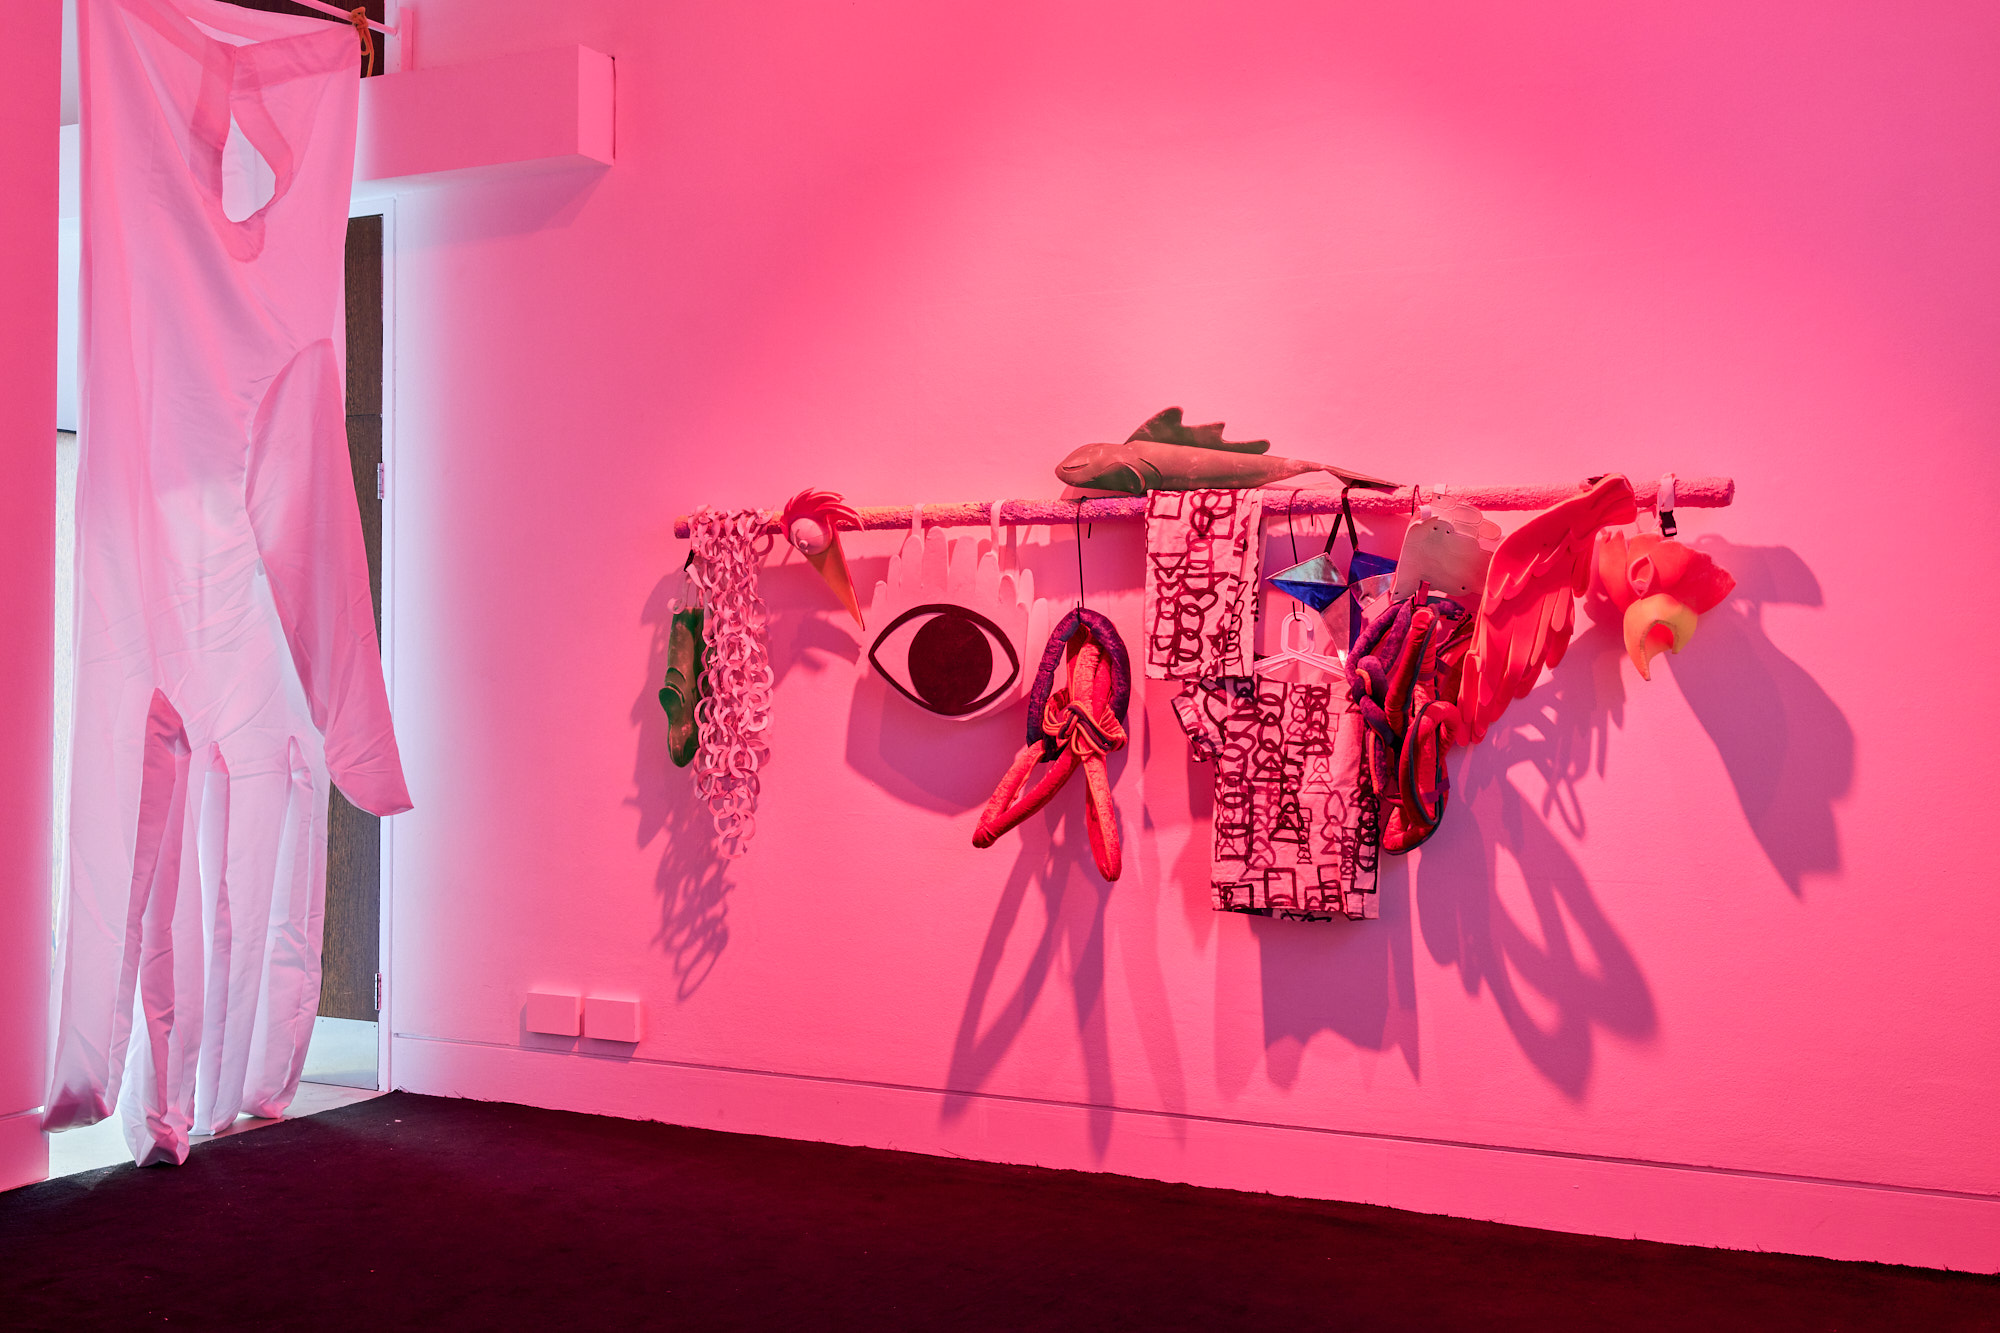 A set of sculptural costumes hanging in a line, a pink light eliminates the gallery space.